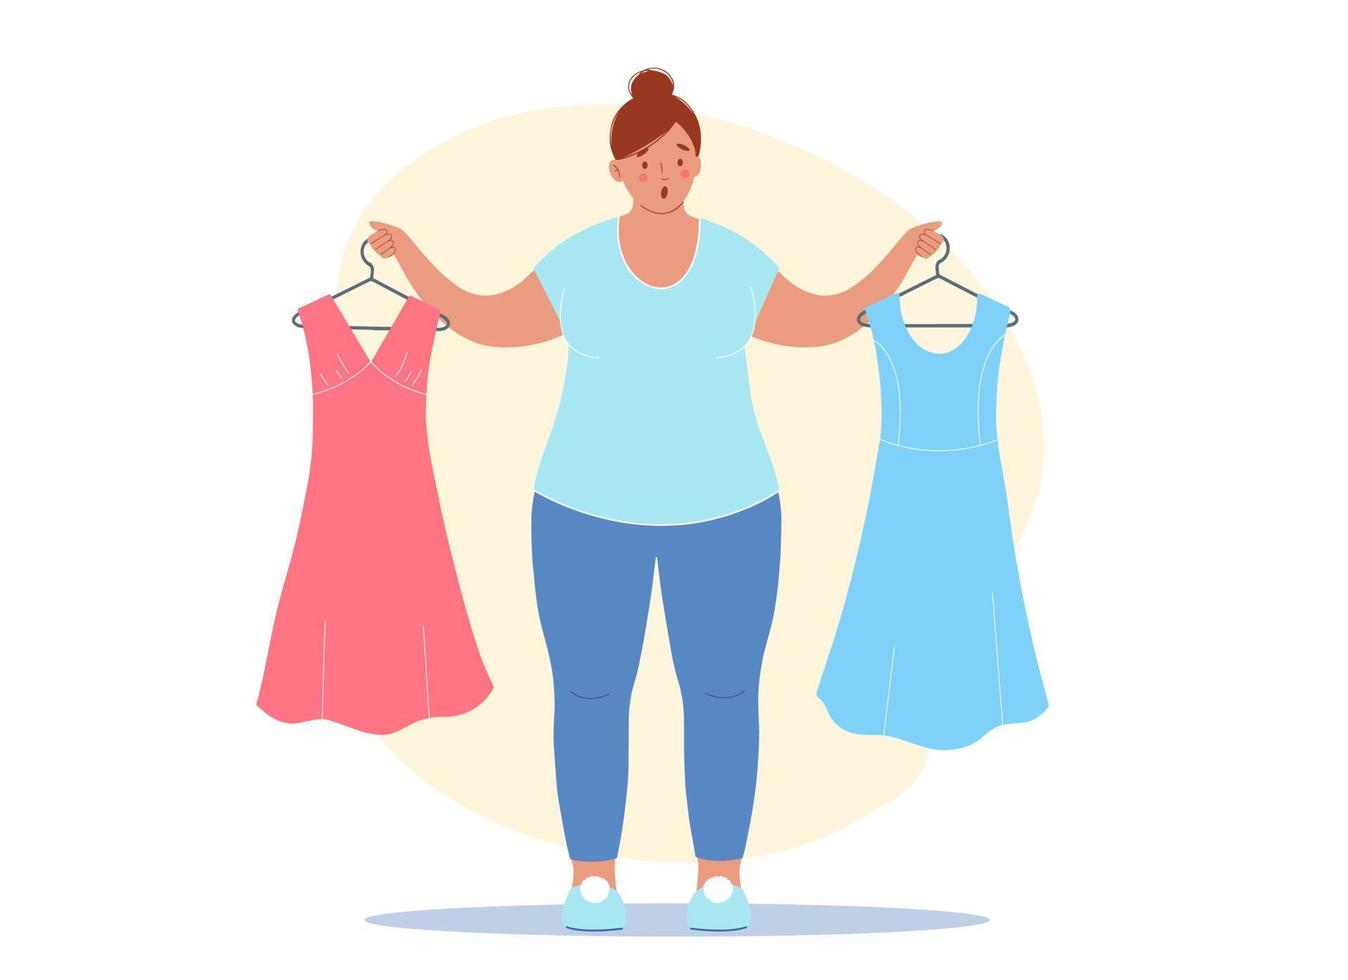 Overweight woman gets upset because of the extra pounds. She is holding her old dresses in her hands, which no longer fit, they are too small for her vector